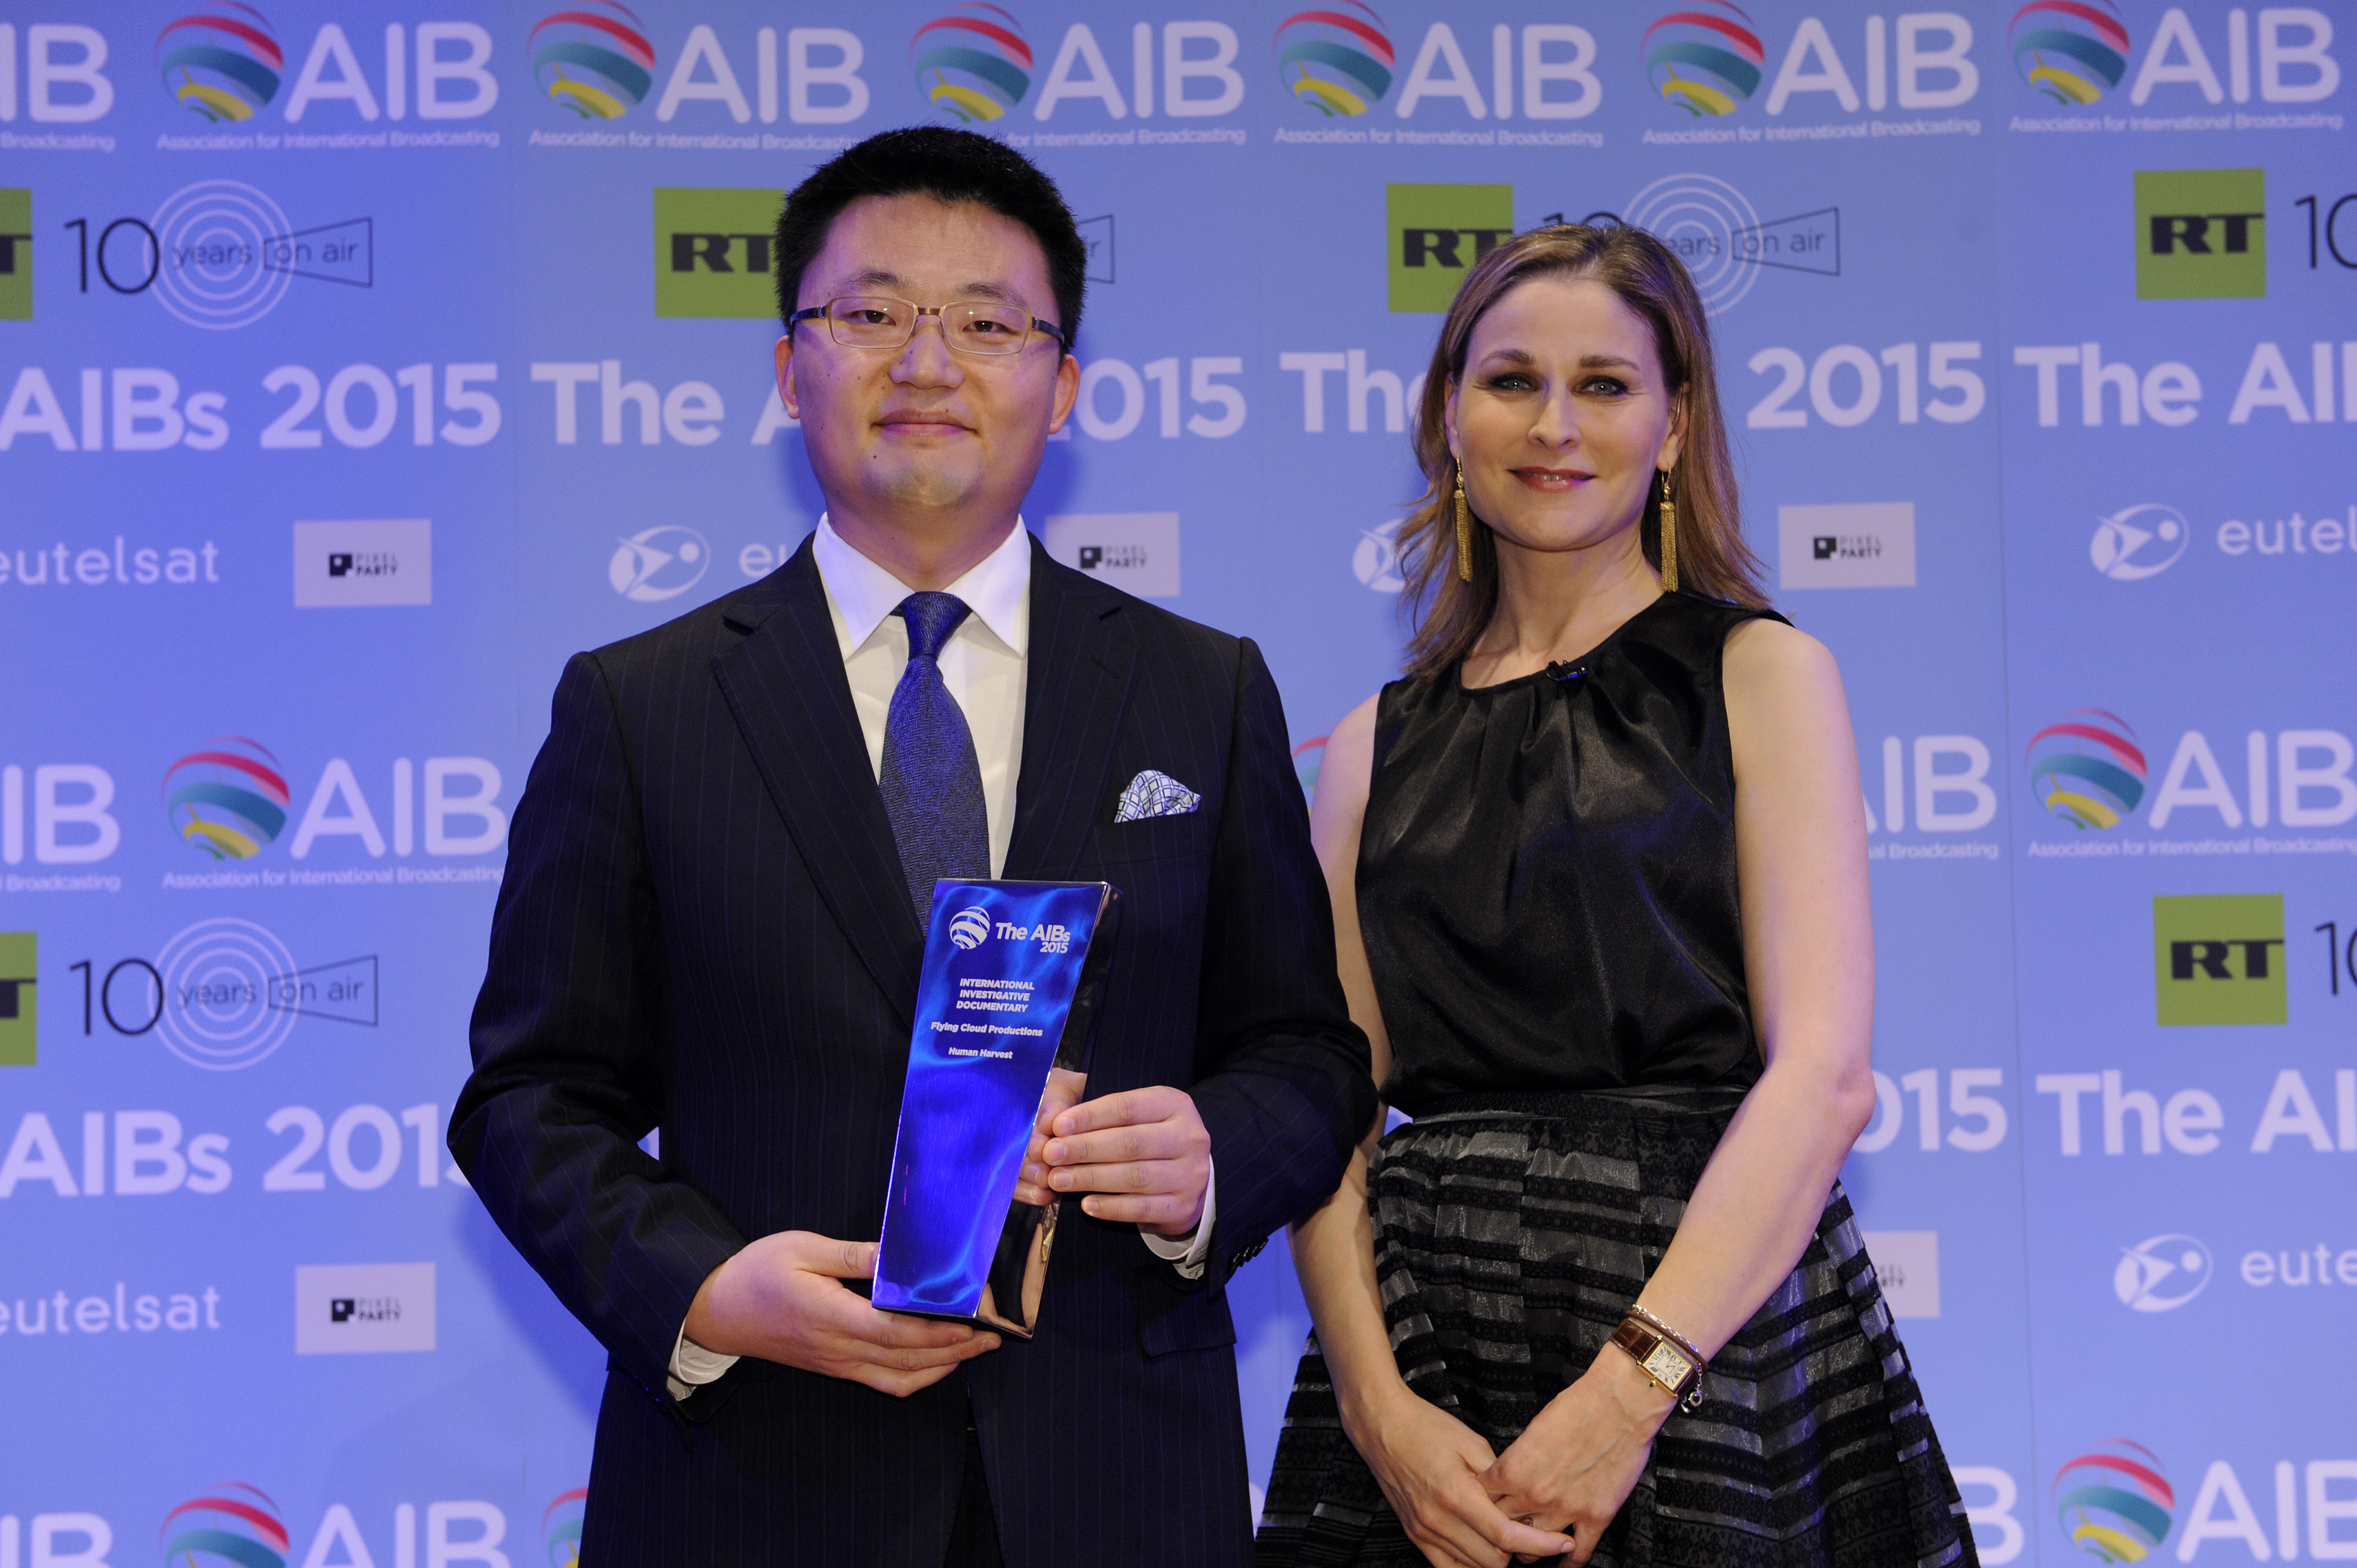 Producer and Director of 'Human Harvest' Leon Lee receives the AIB Award on November 4, 2015 in London, United Kingdom.